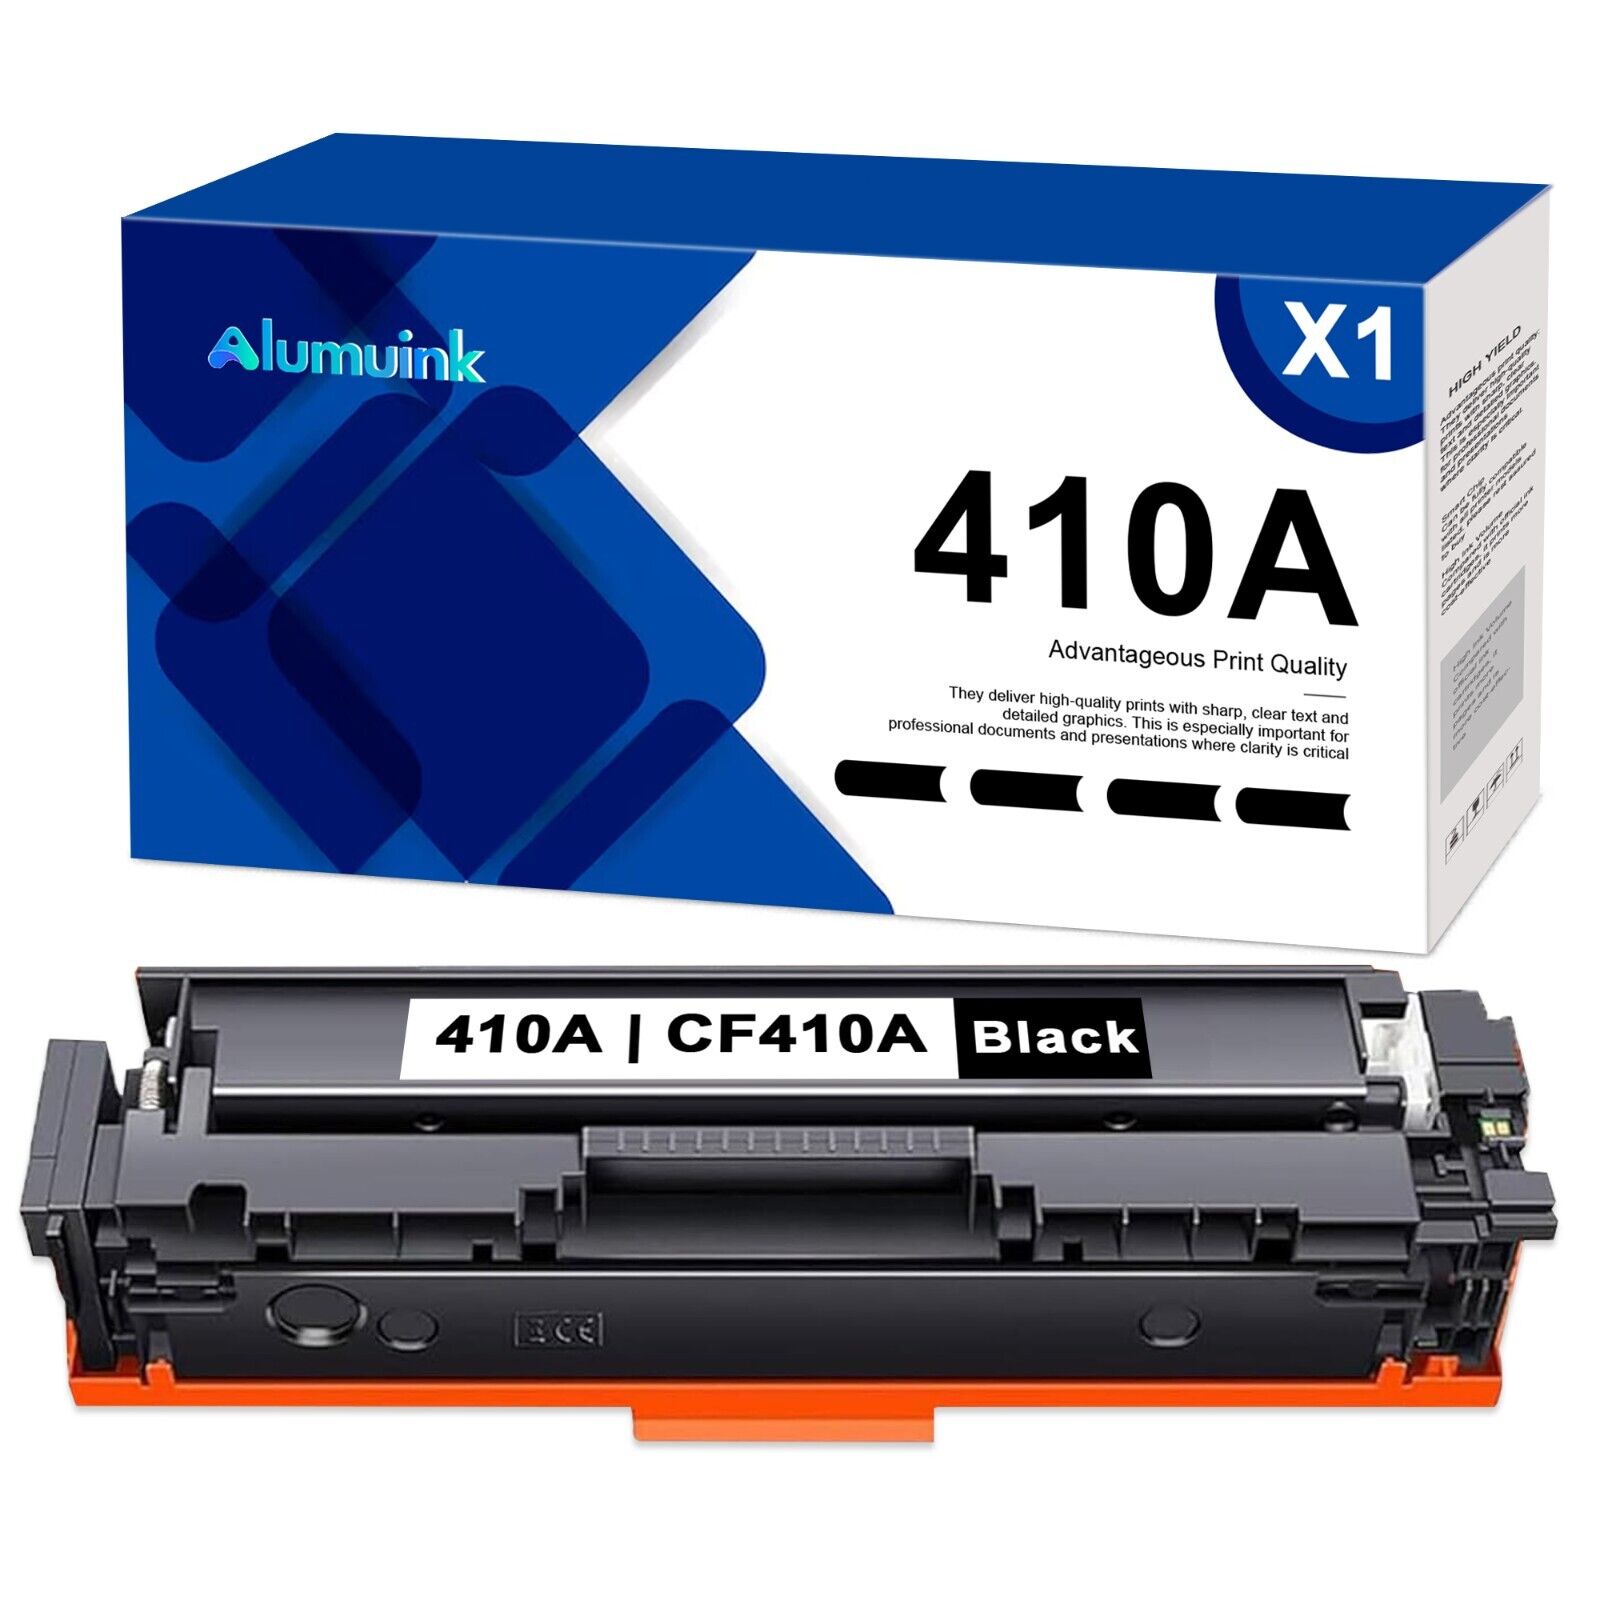 1PK 410A Black Toner Cartridge Replacement for HP 410A CF410A Color Pro M452nw